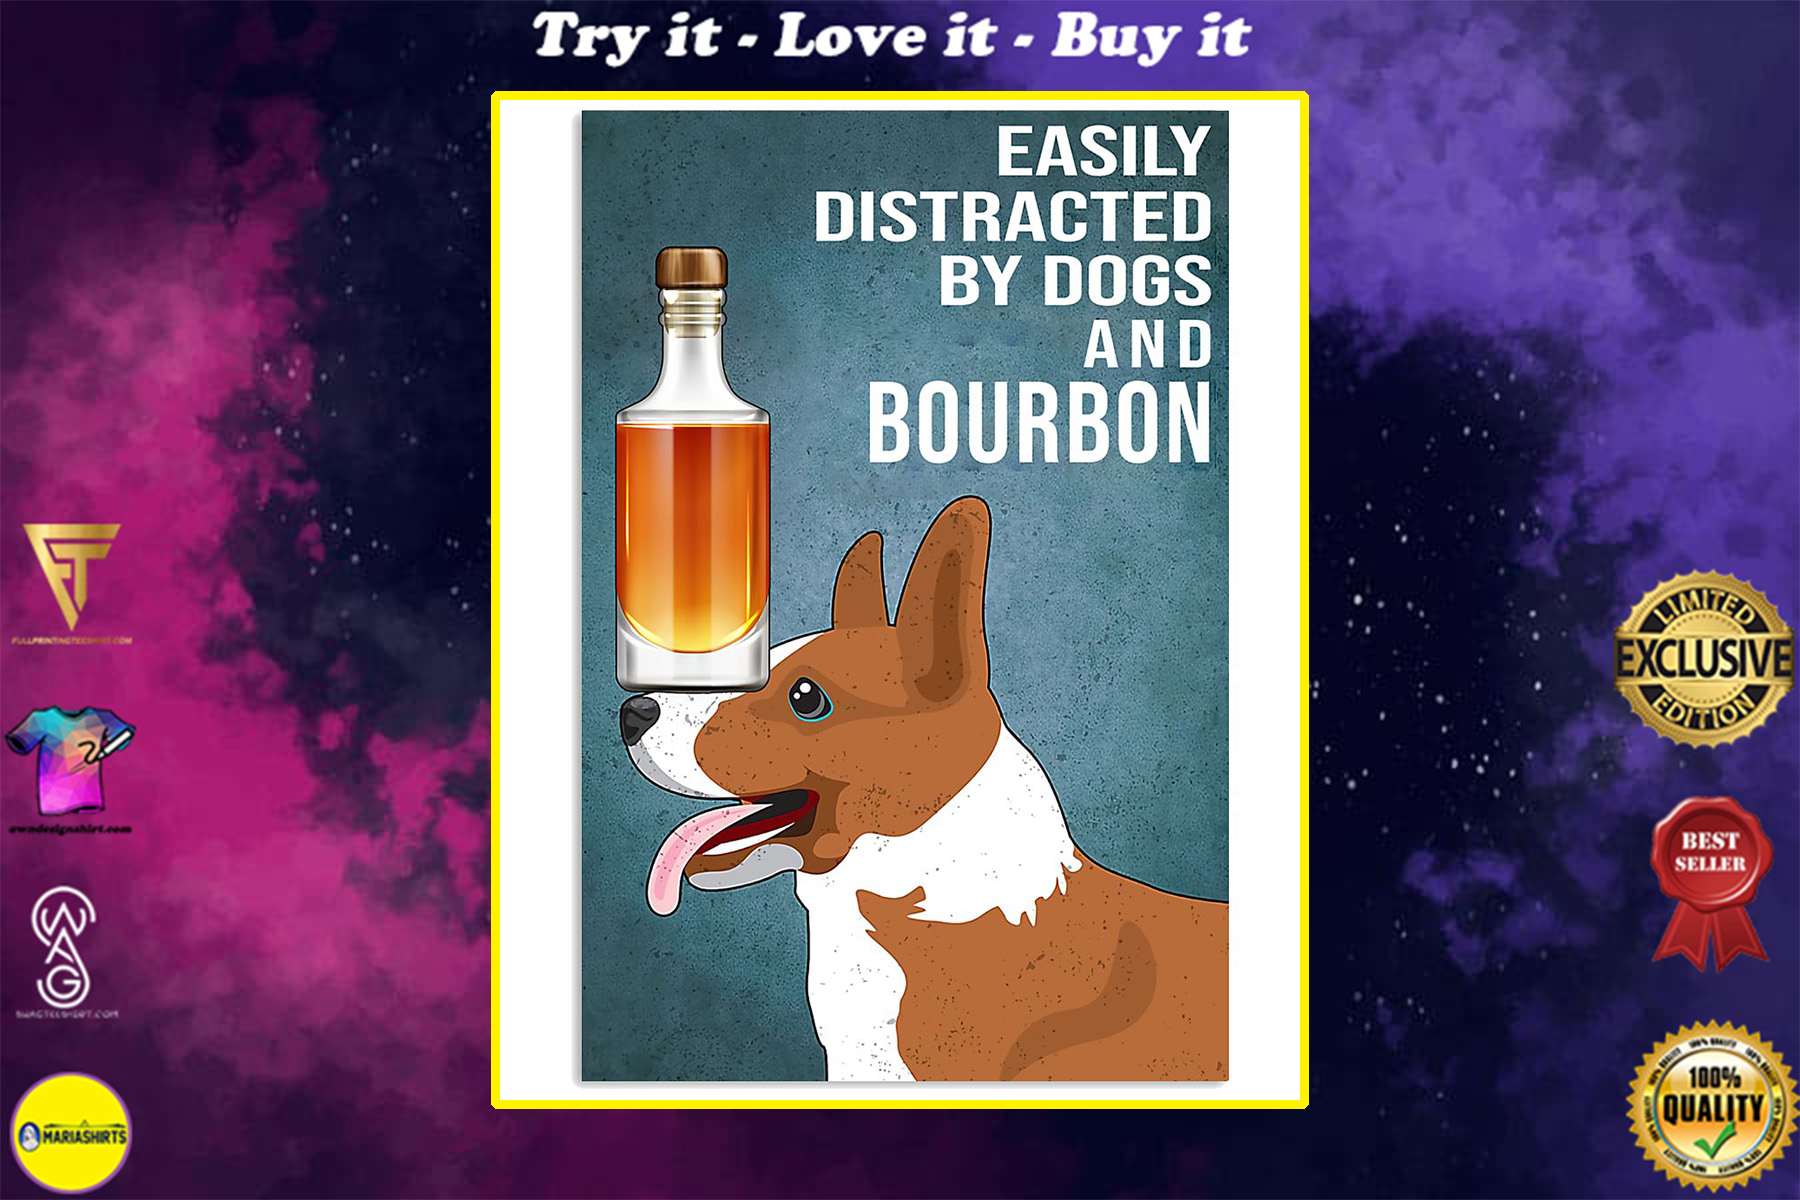 vintage dog corgi easily distracted by dogs and bourbon poster